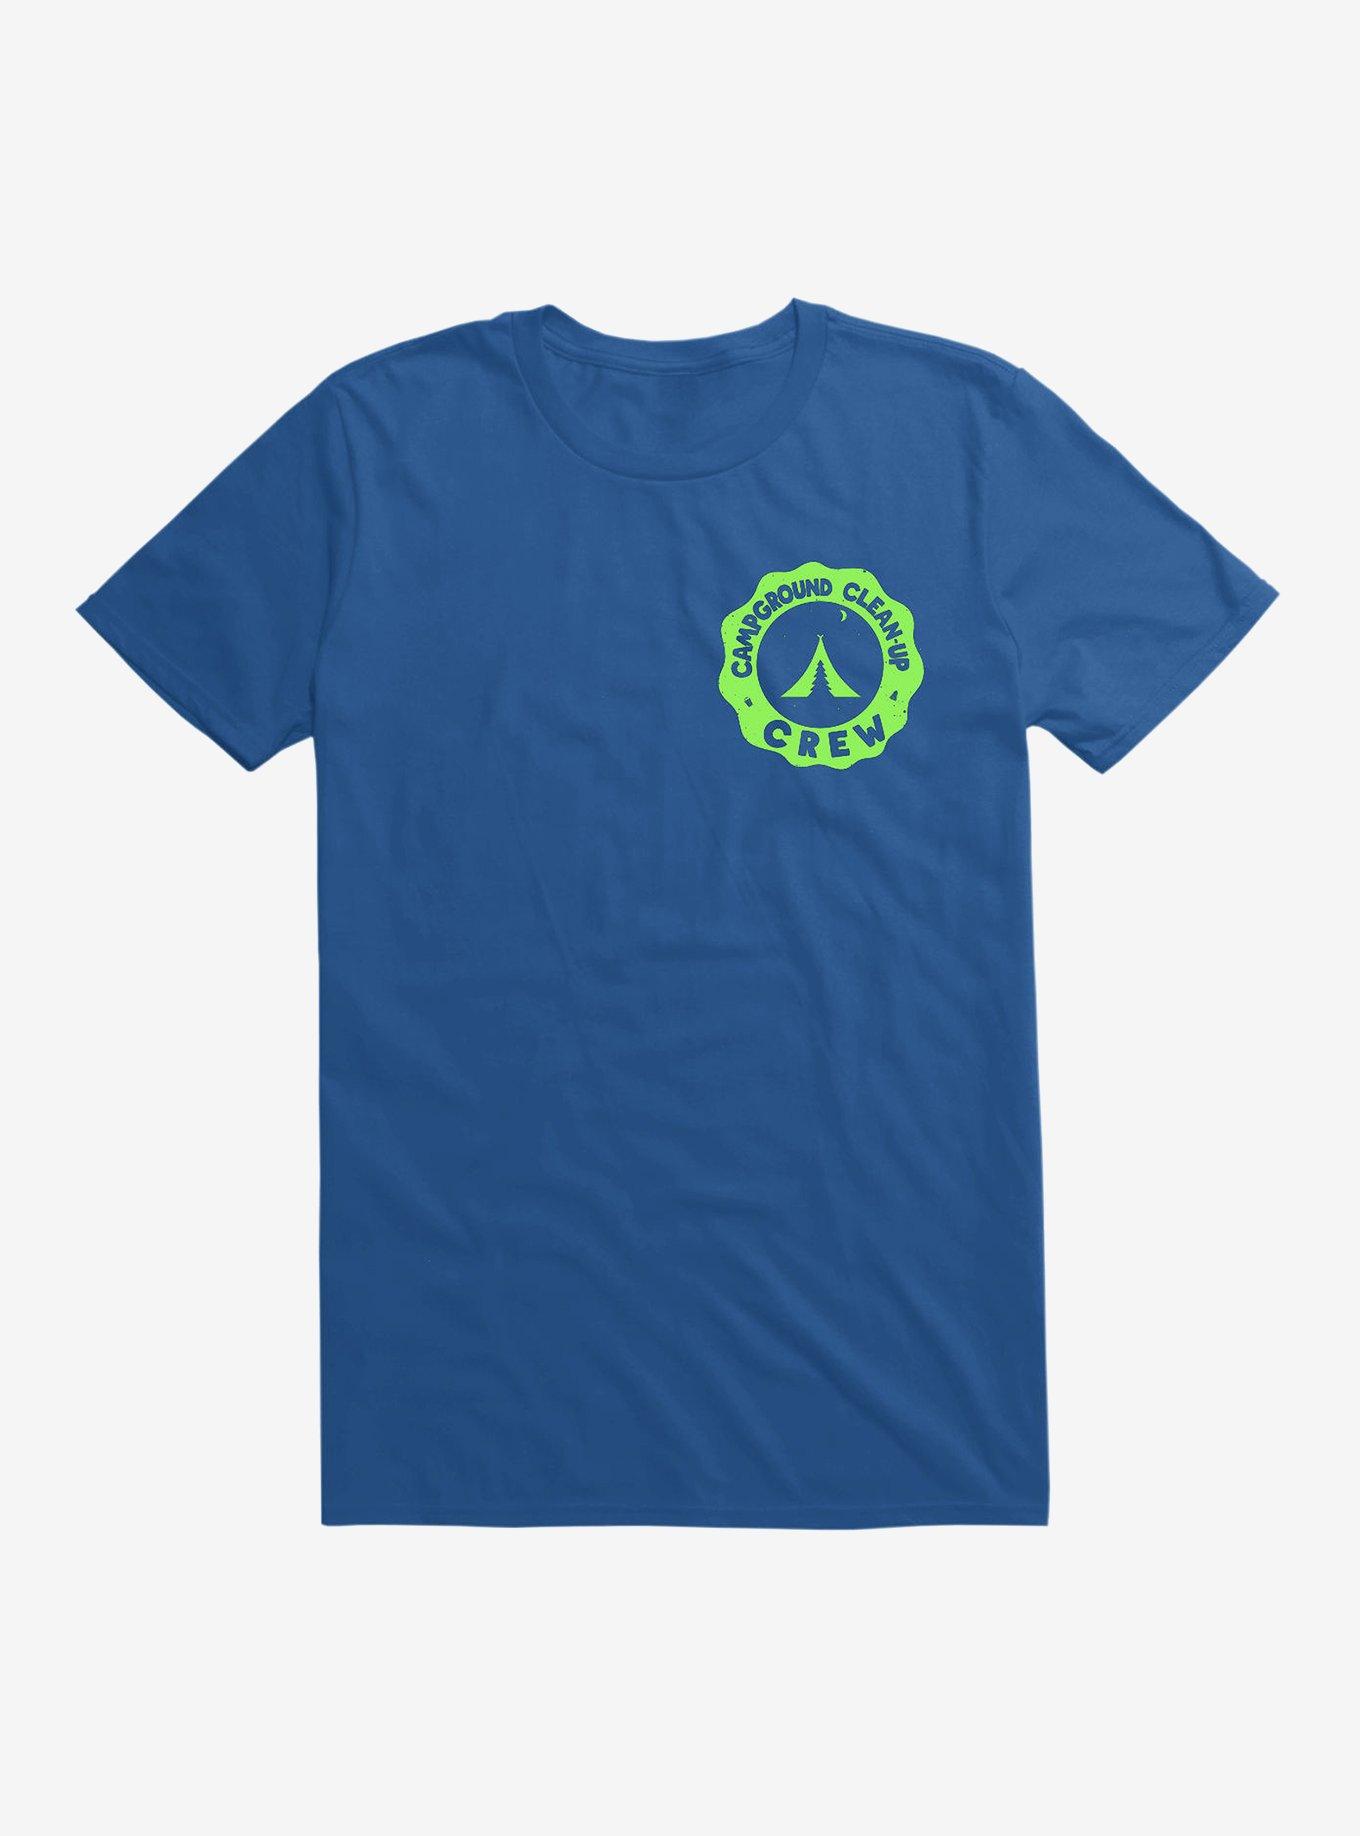 Campground Cleanup Crew T-Shirt, ROYAL, hi-res